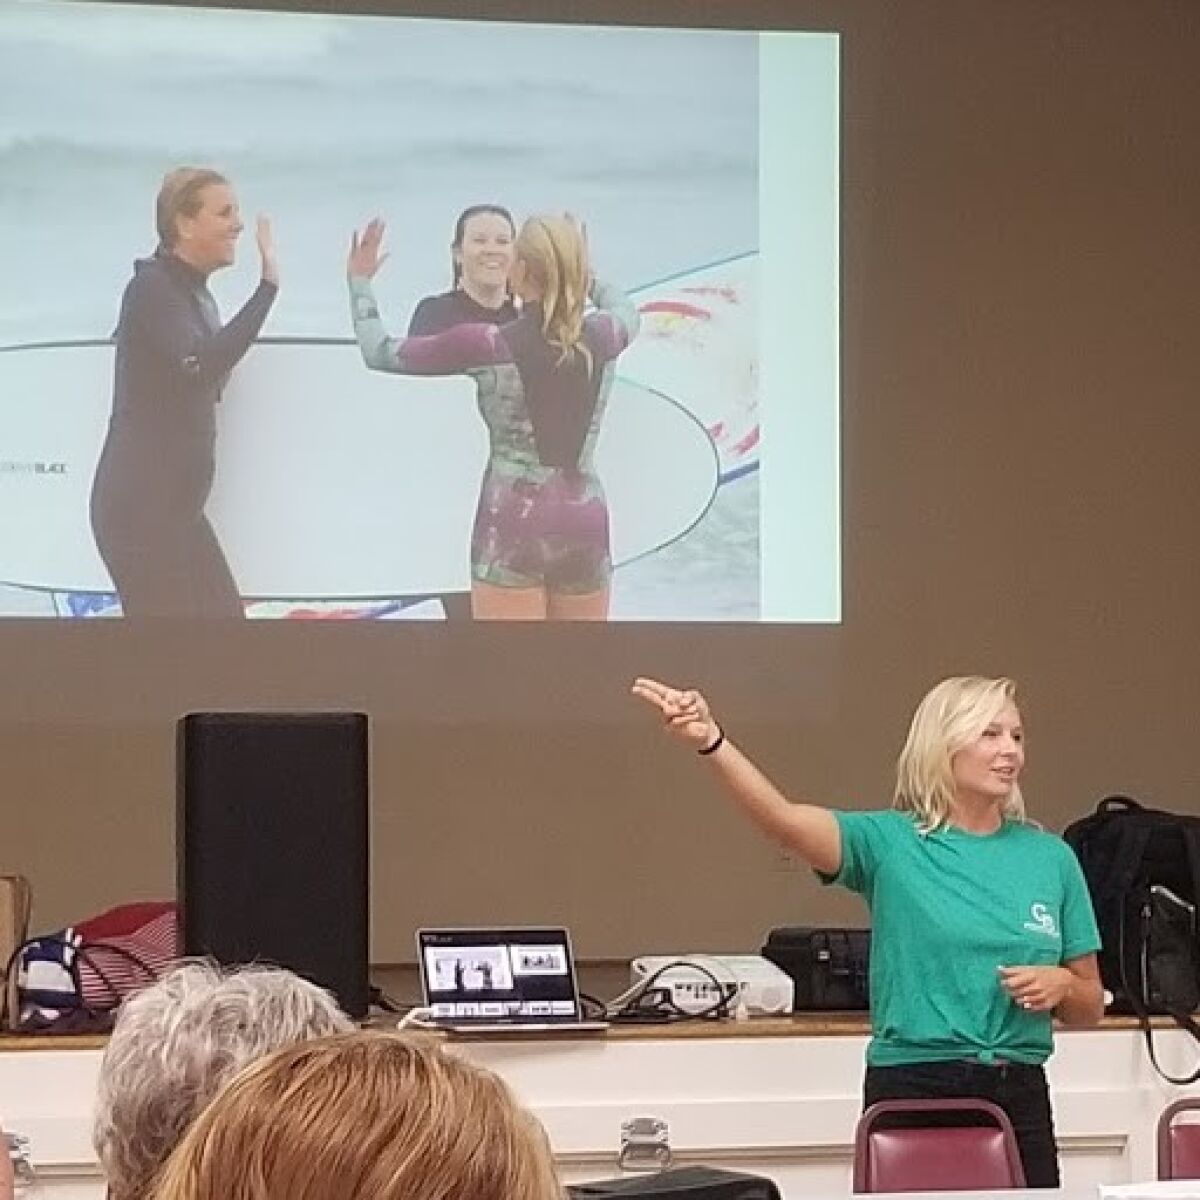 During the OB Town Council meeting, Sept. 25, Groundswell Project founder Natalie Small describes how her ‘surf therapy’ program has helped dozens of local women.